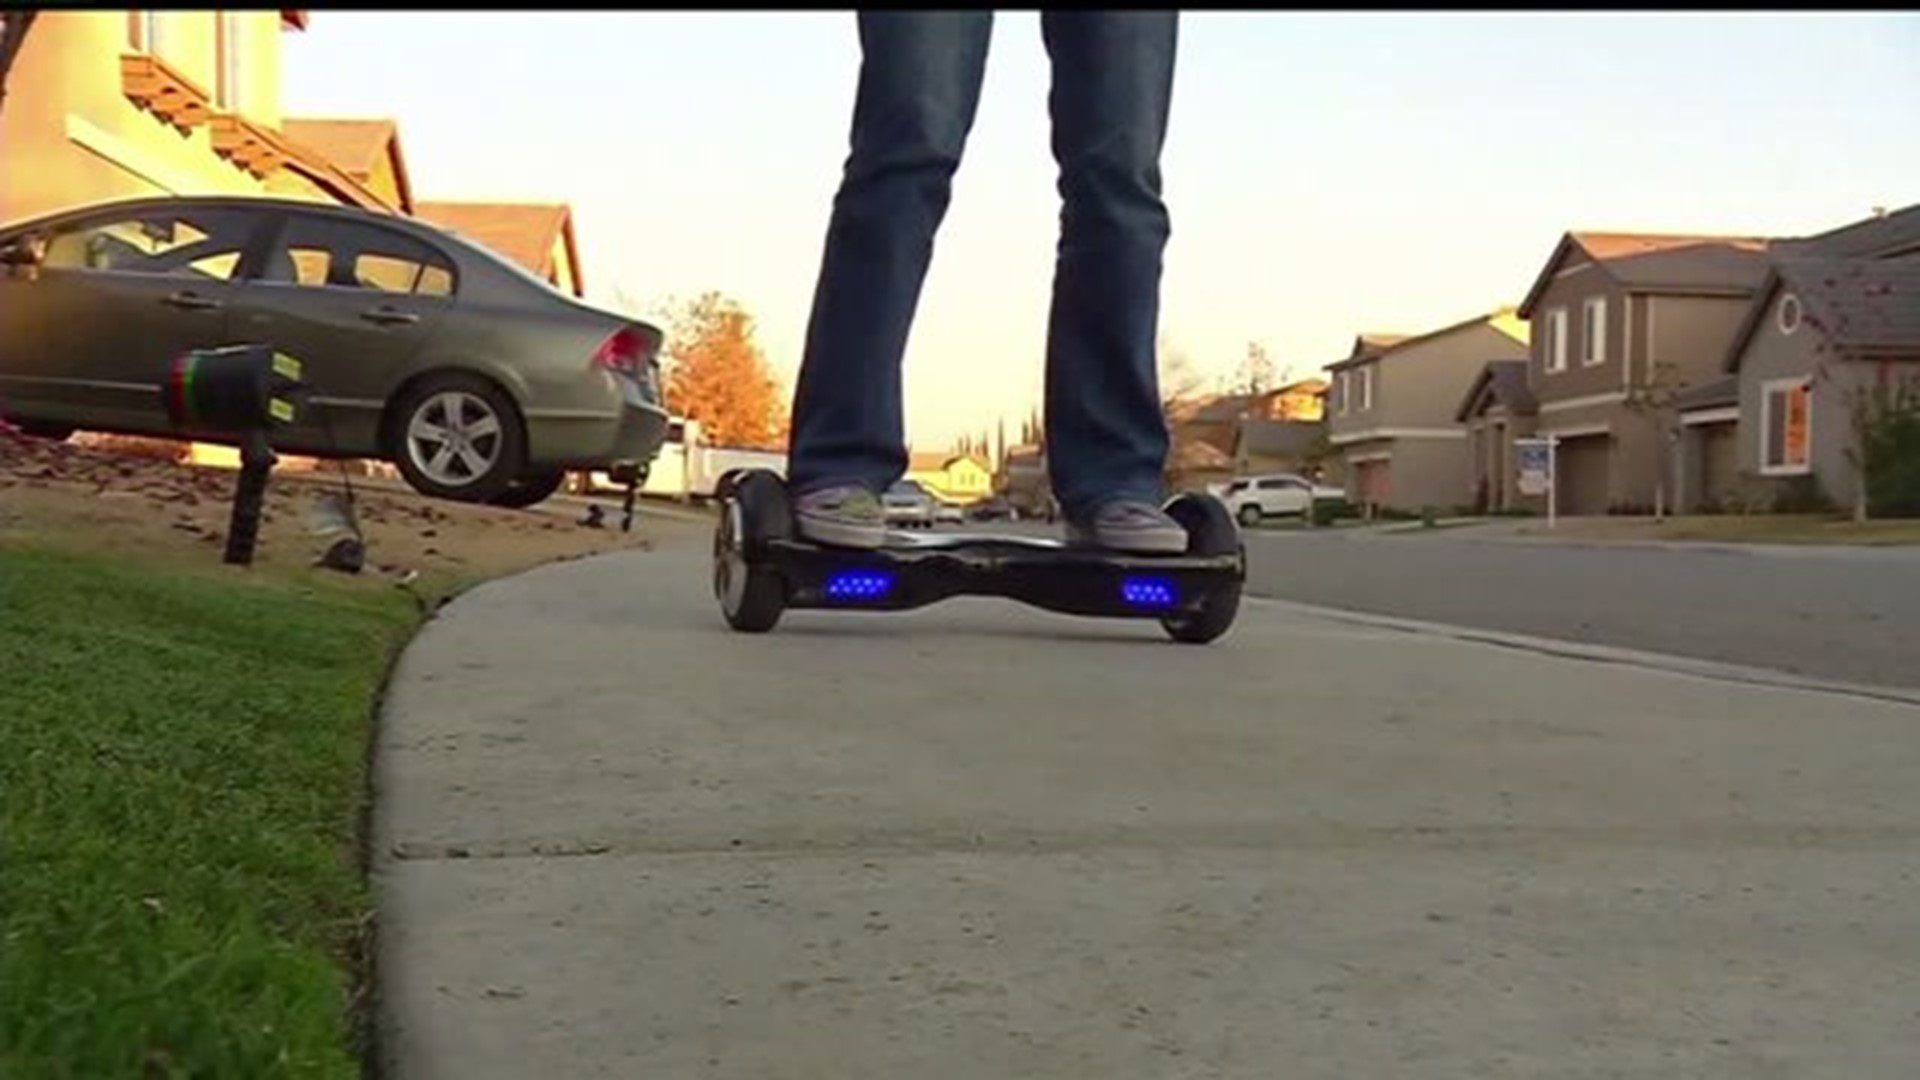 Hoverboards banned from local colleges and universities